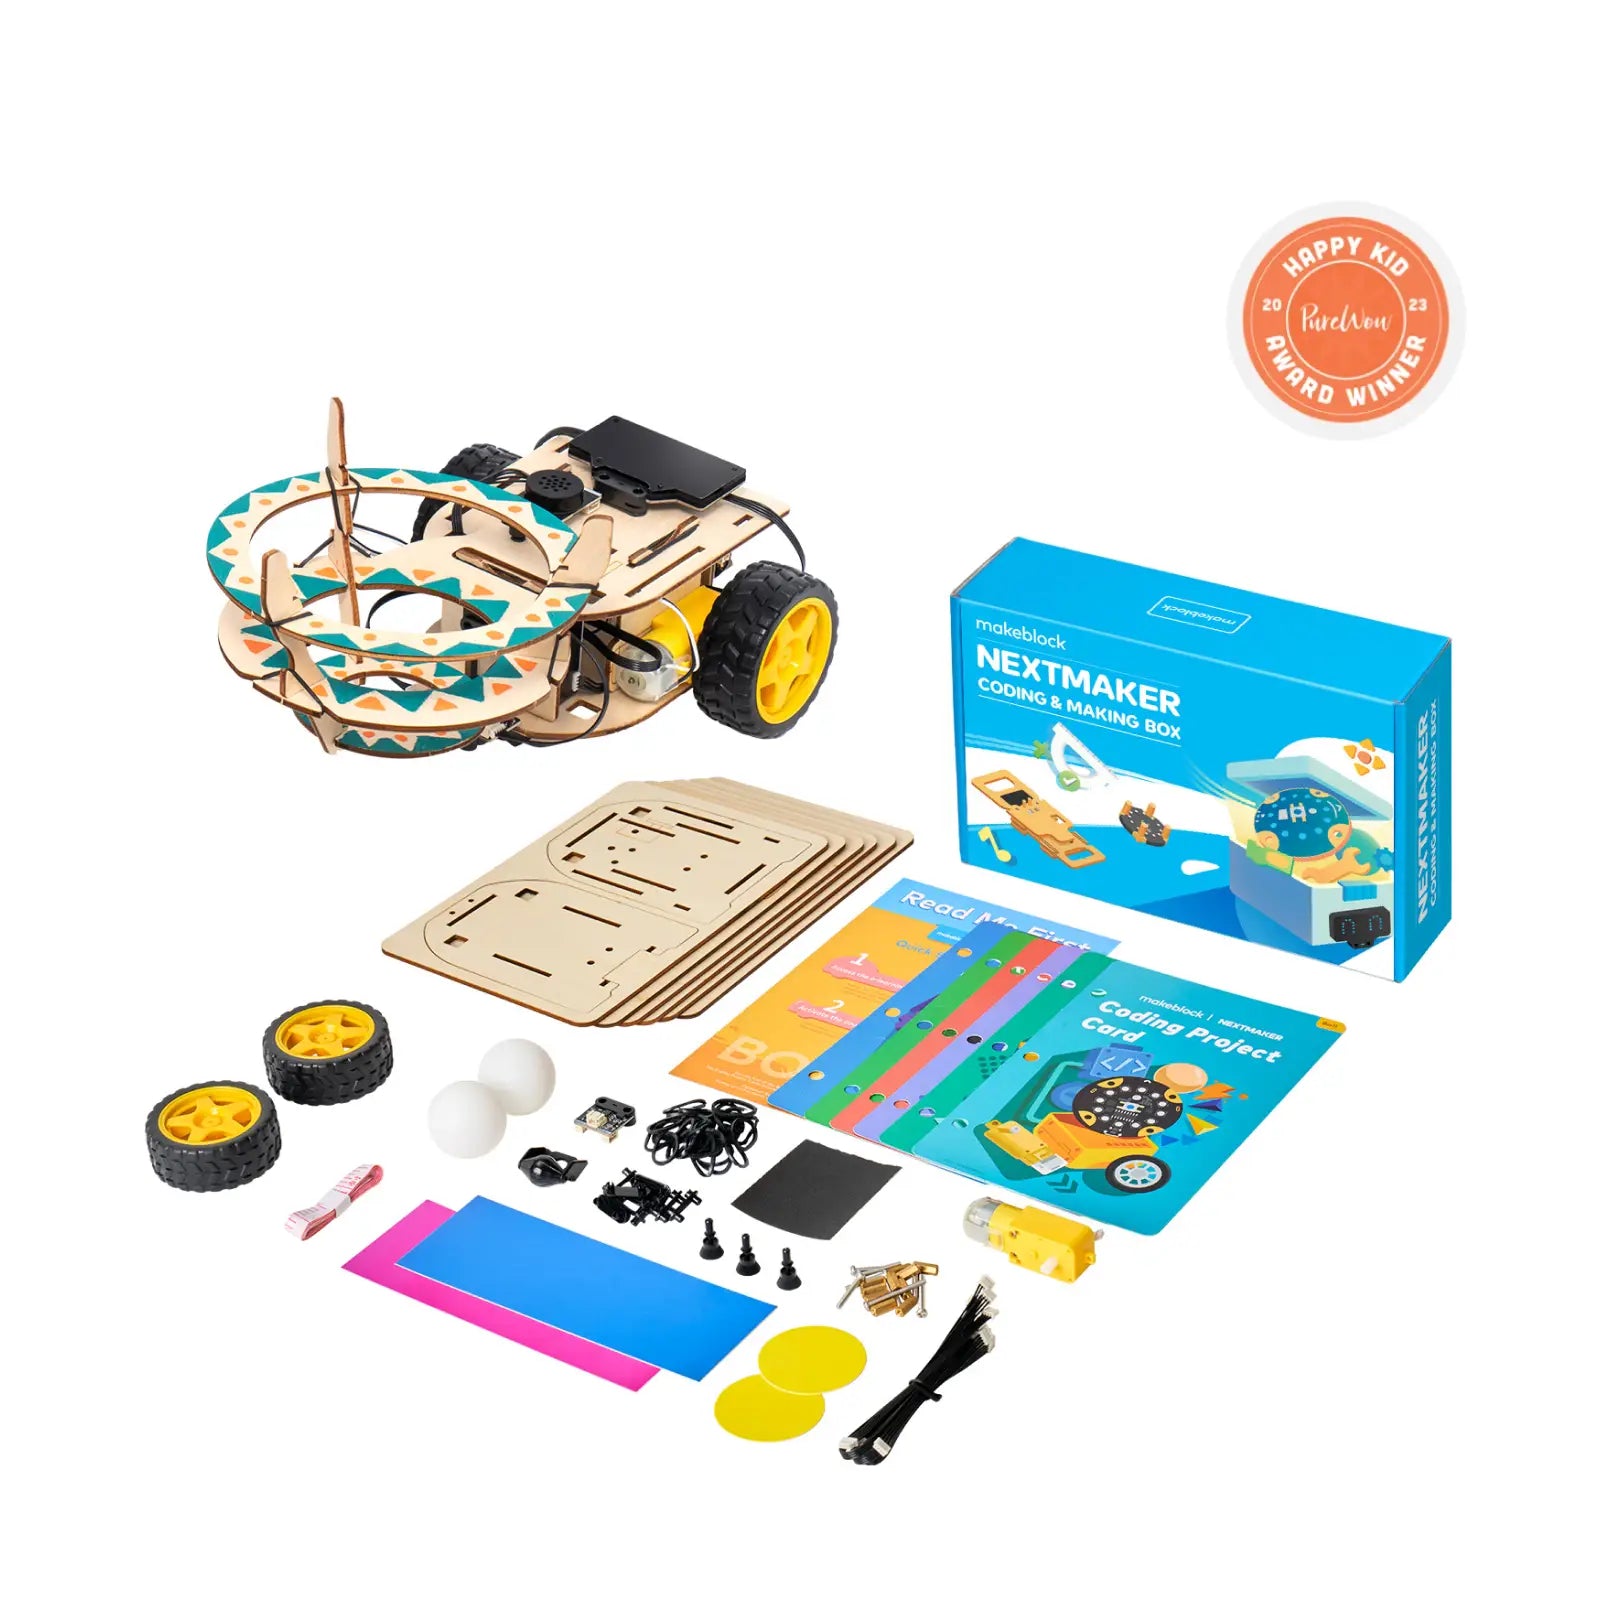 Makeblock NextMaker: STEM Kits with DIY Projects and Free Online Lessons